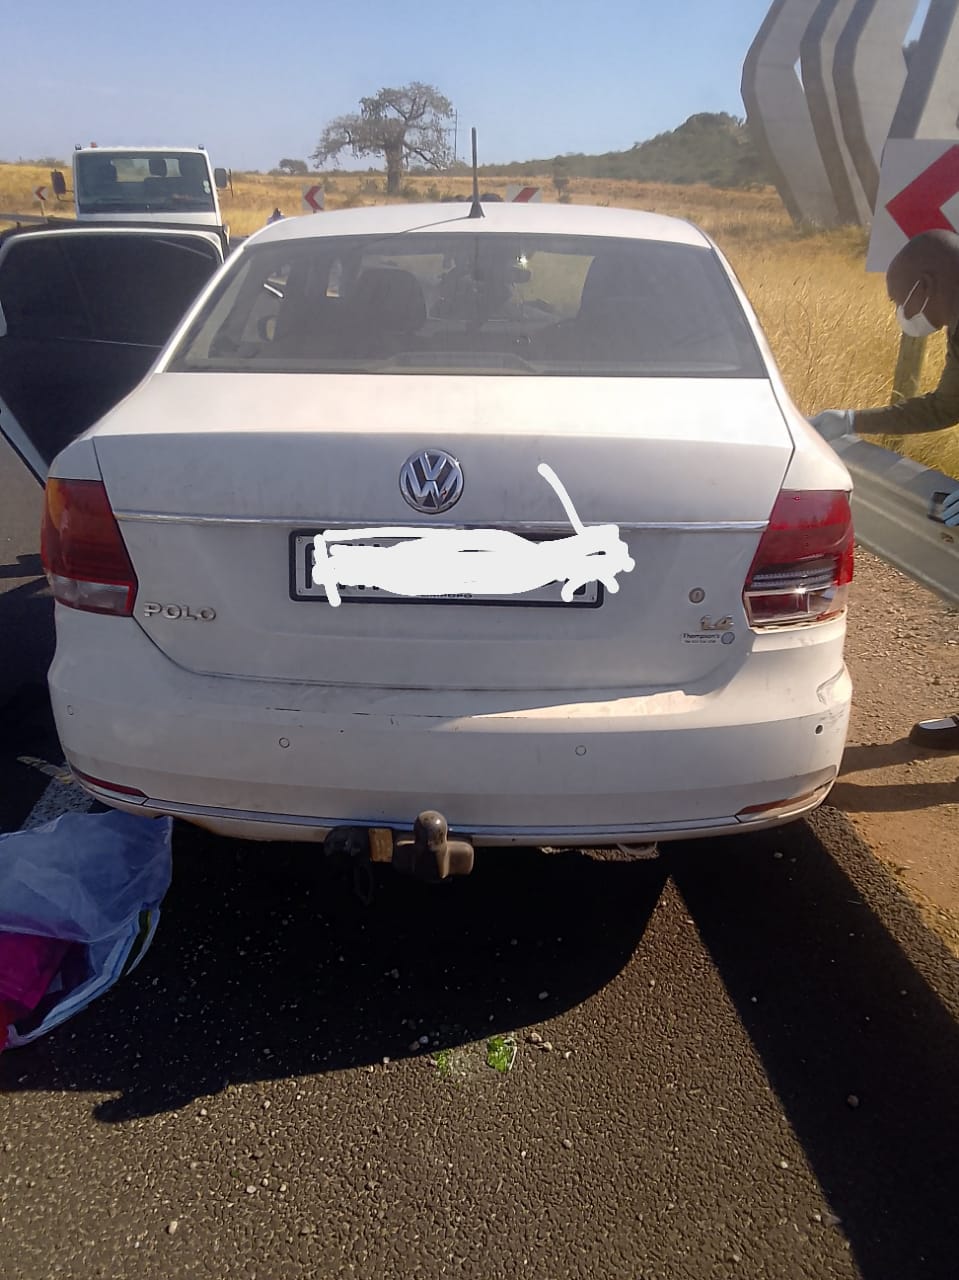 SEVEN SUSPECTS NABBED FOR SEVERAL CASES INCLUDING ARMED ROBBERY AND ILLEGAL POSSESSION OF FIREARMS IN MUSINA